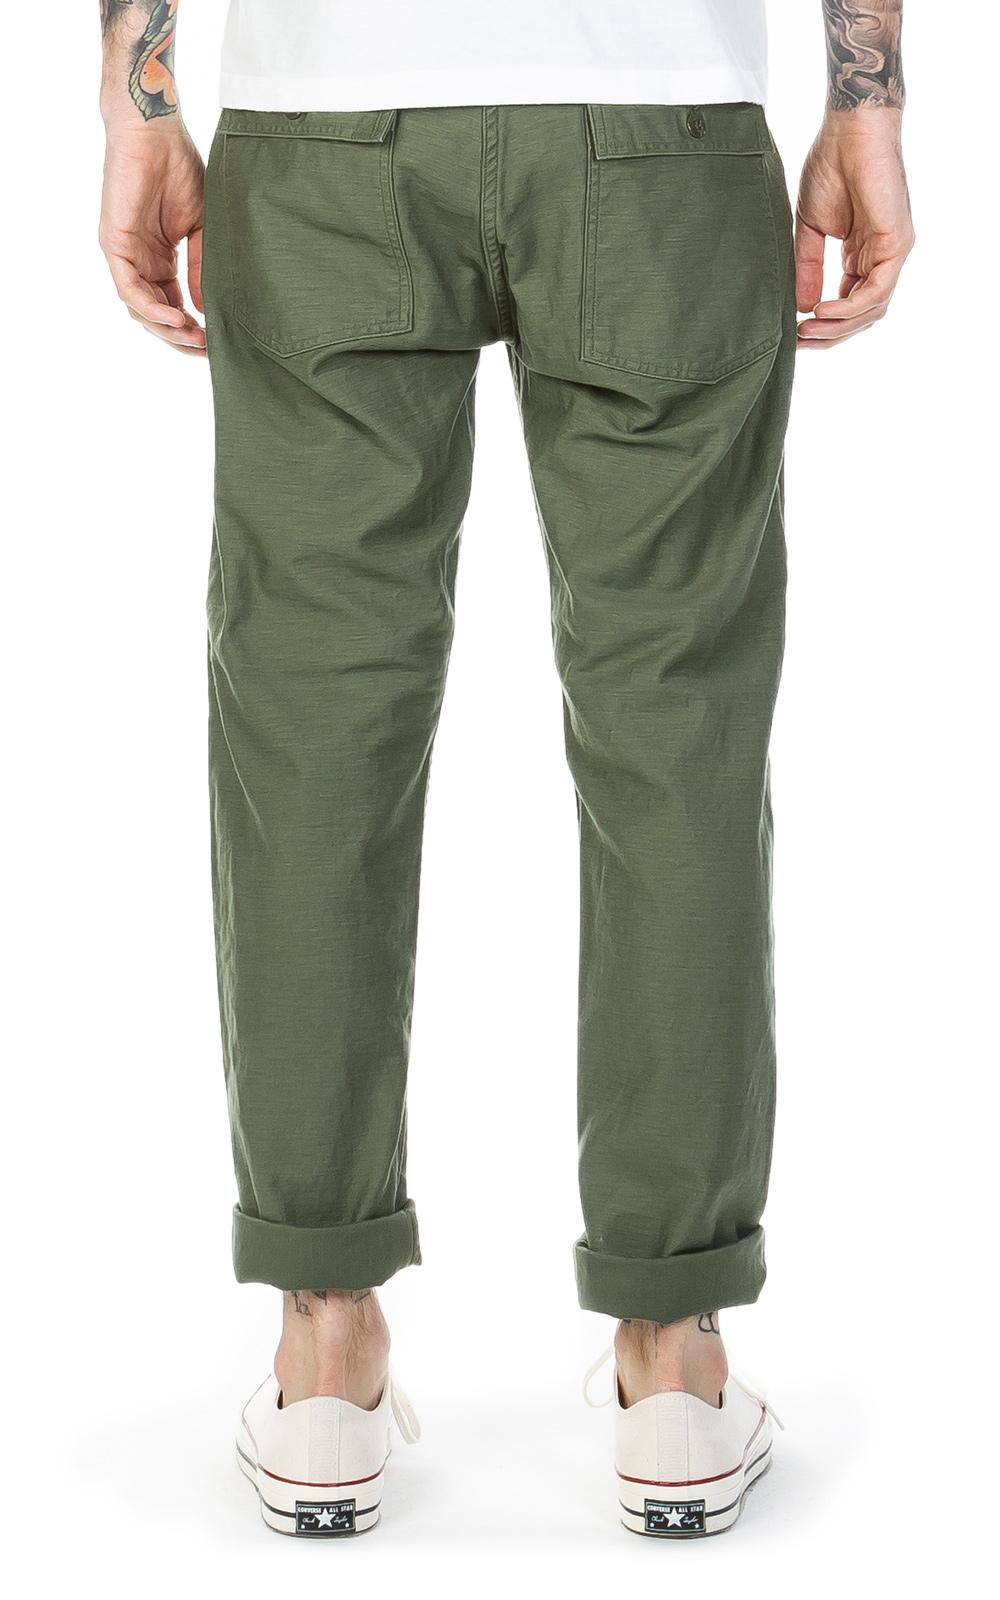 Army Fatigue Pants Mens - Army Military